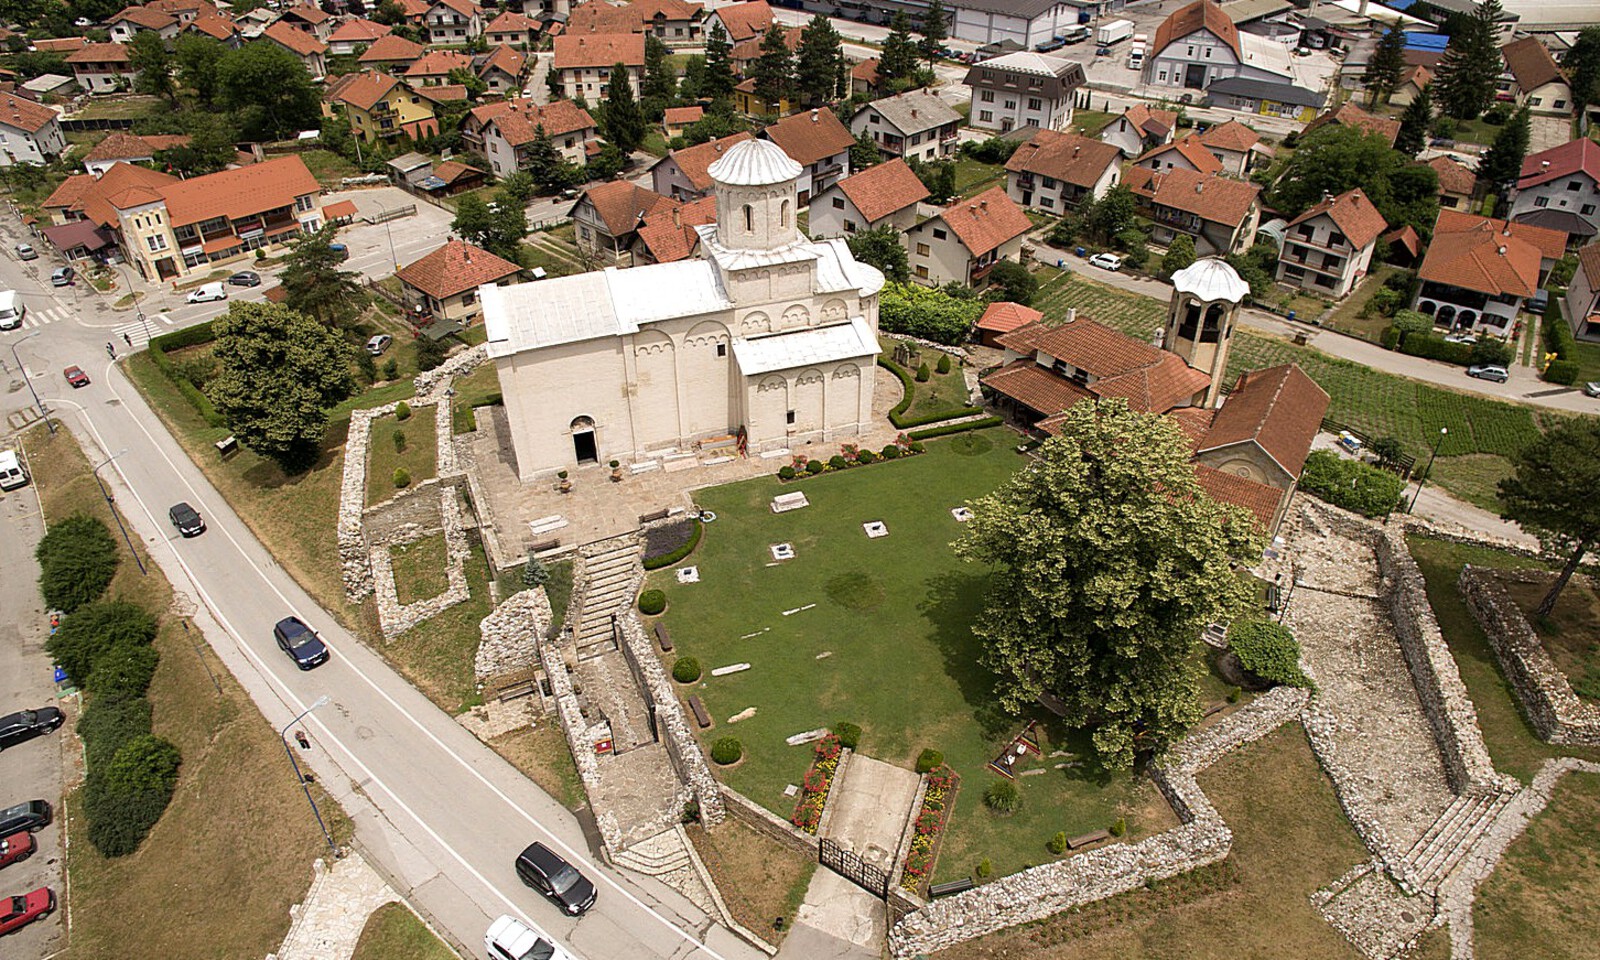 Arilje church and remains of the monastery buildings